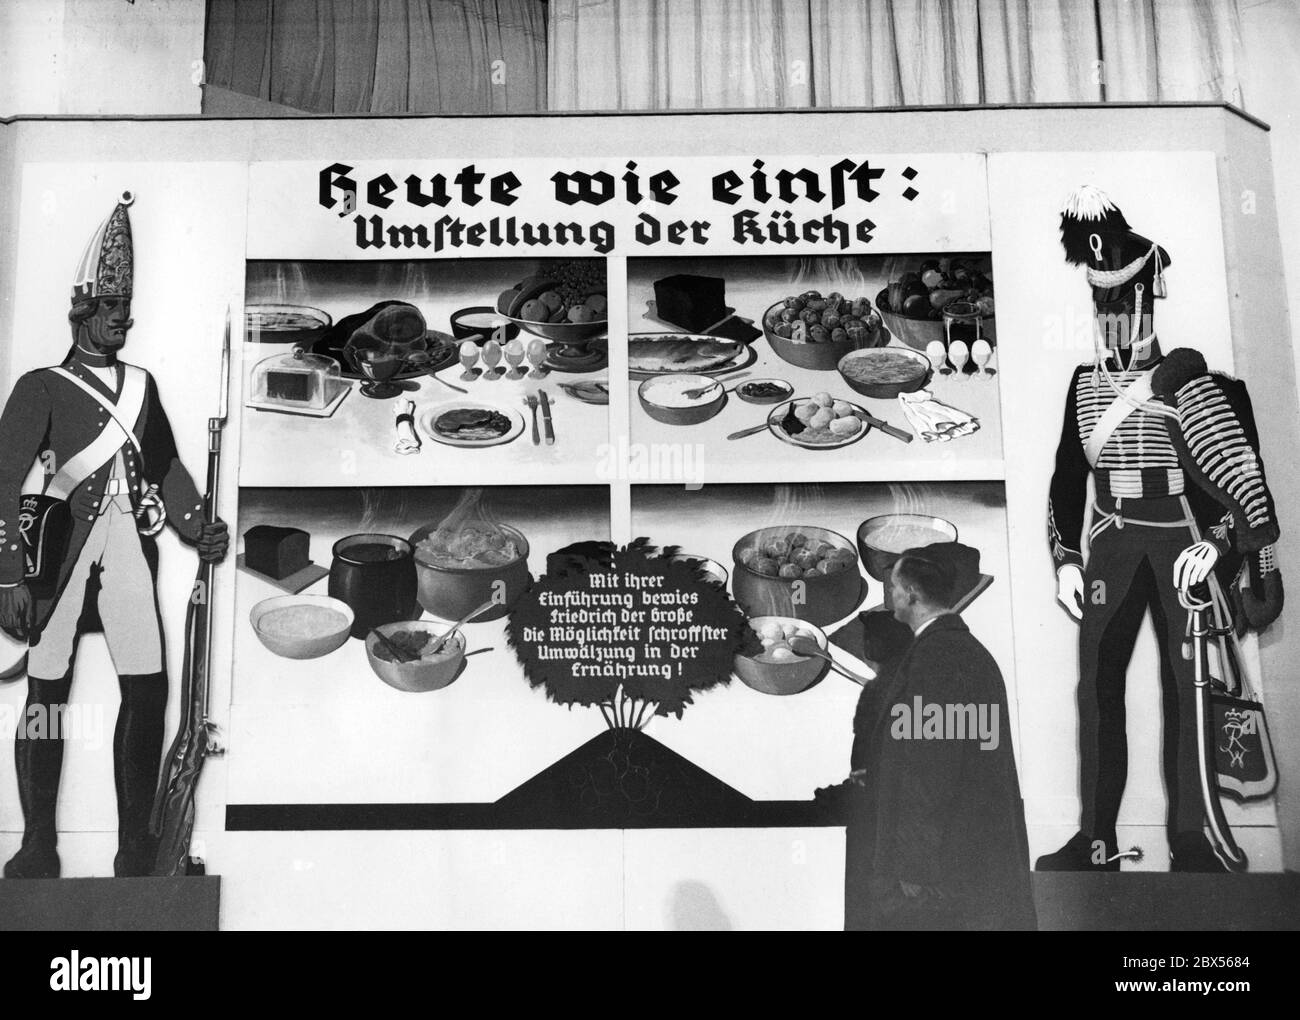 Information board on the rearrangement of the kitchen under Frederick the Great of Prussia at the international fair "Green Week Berlin". The board "Today as in the old days: rearrangement of the kitchen" draws a traditional line between the thriftiness of the food used during the reign of Frederick I and the Third Reich. " By introducing it, Frederick the Great proved the possibility of a radical change in nutrition!". Stock Photo